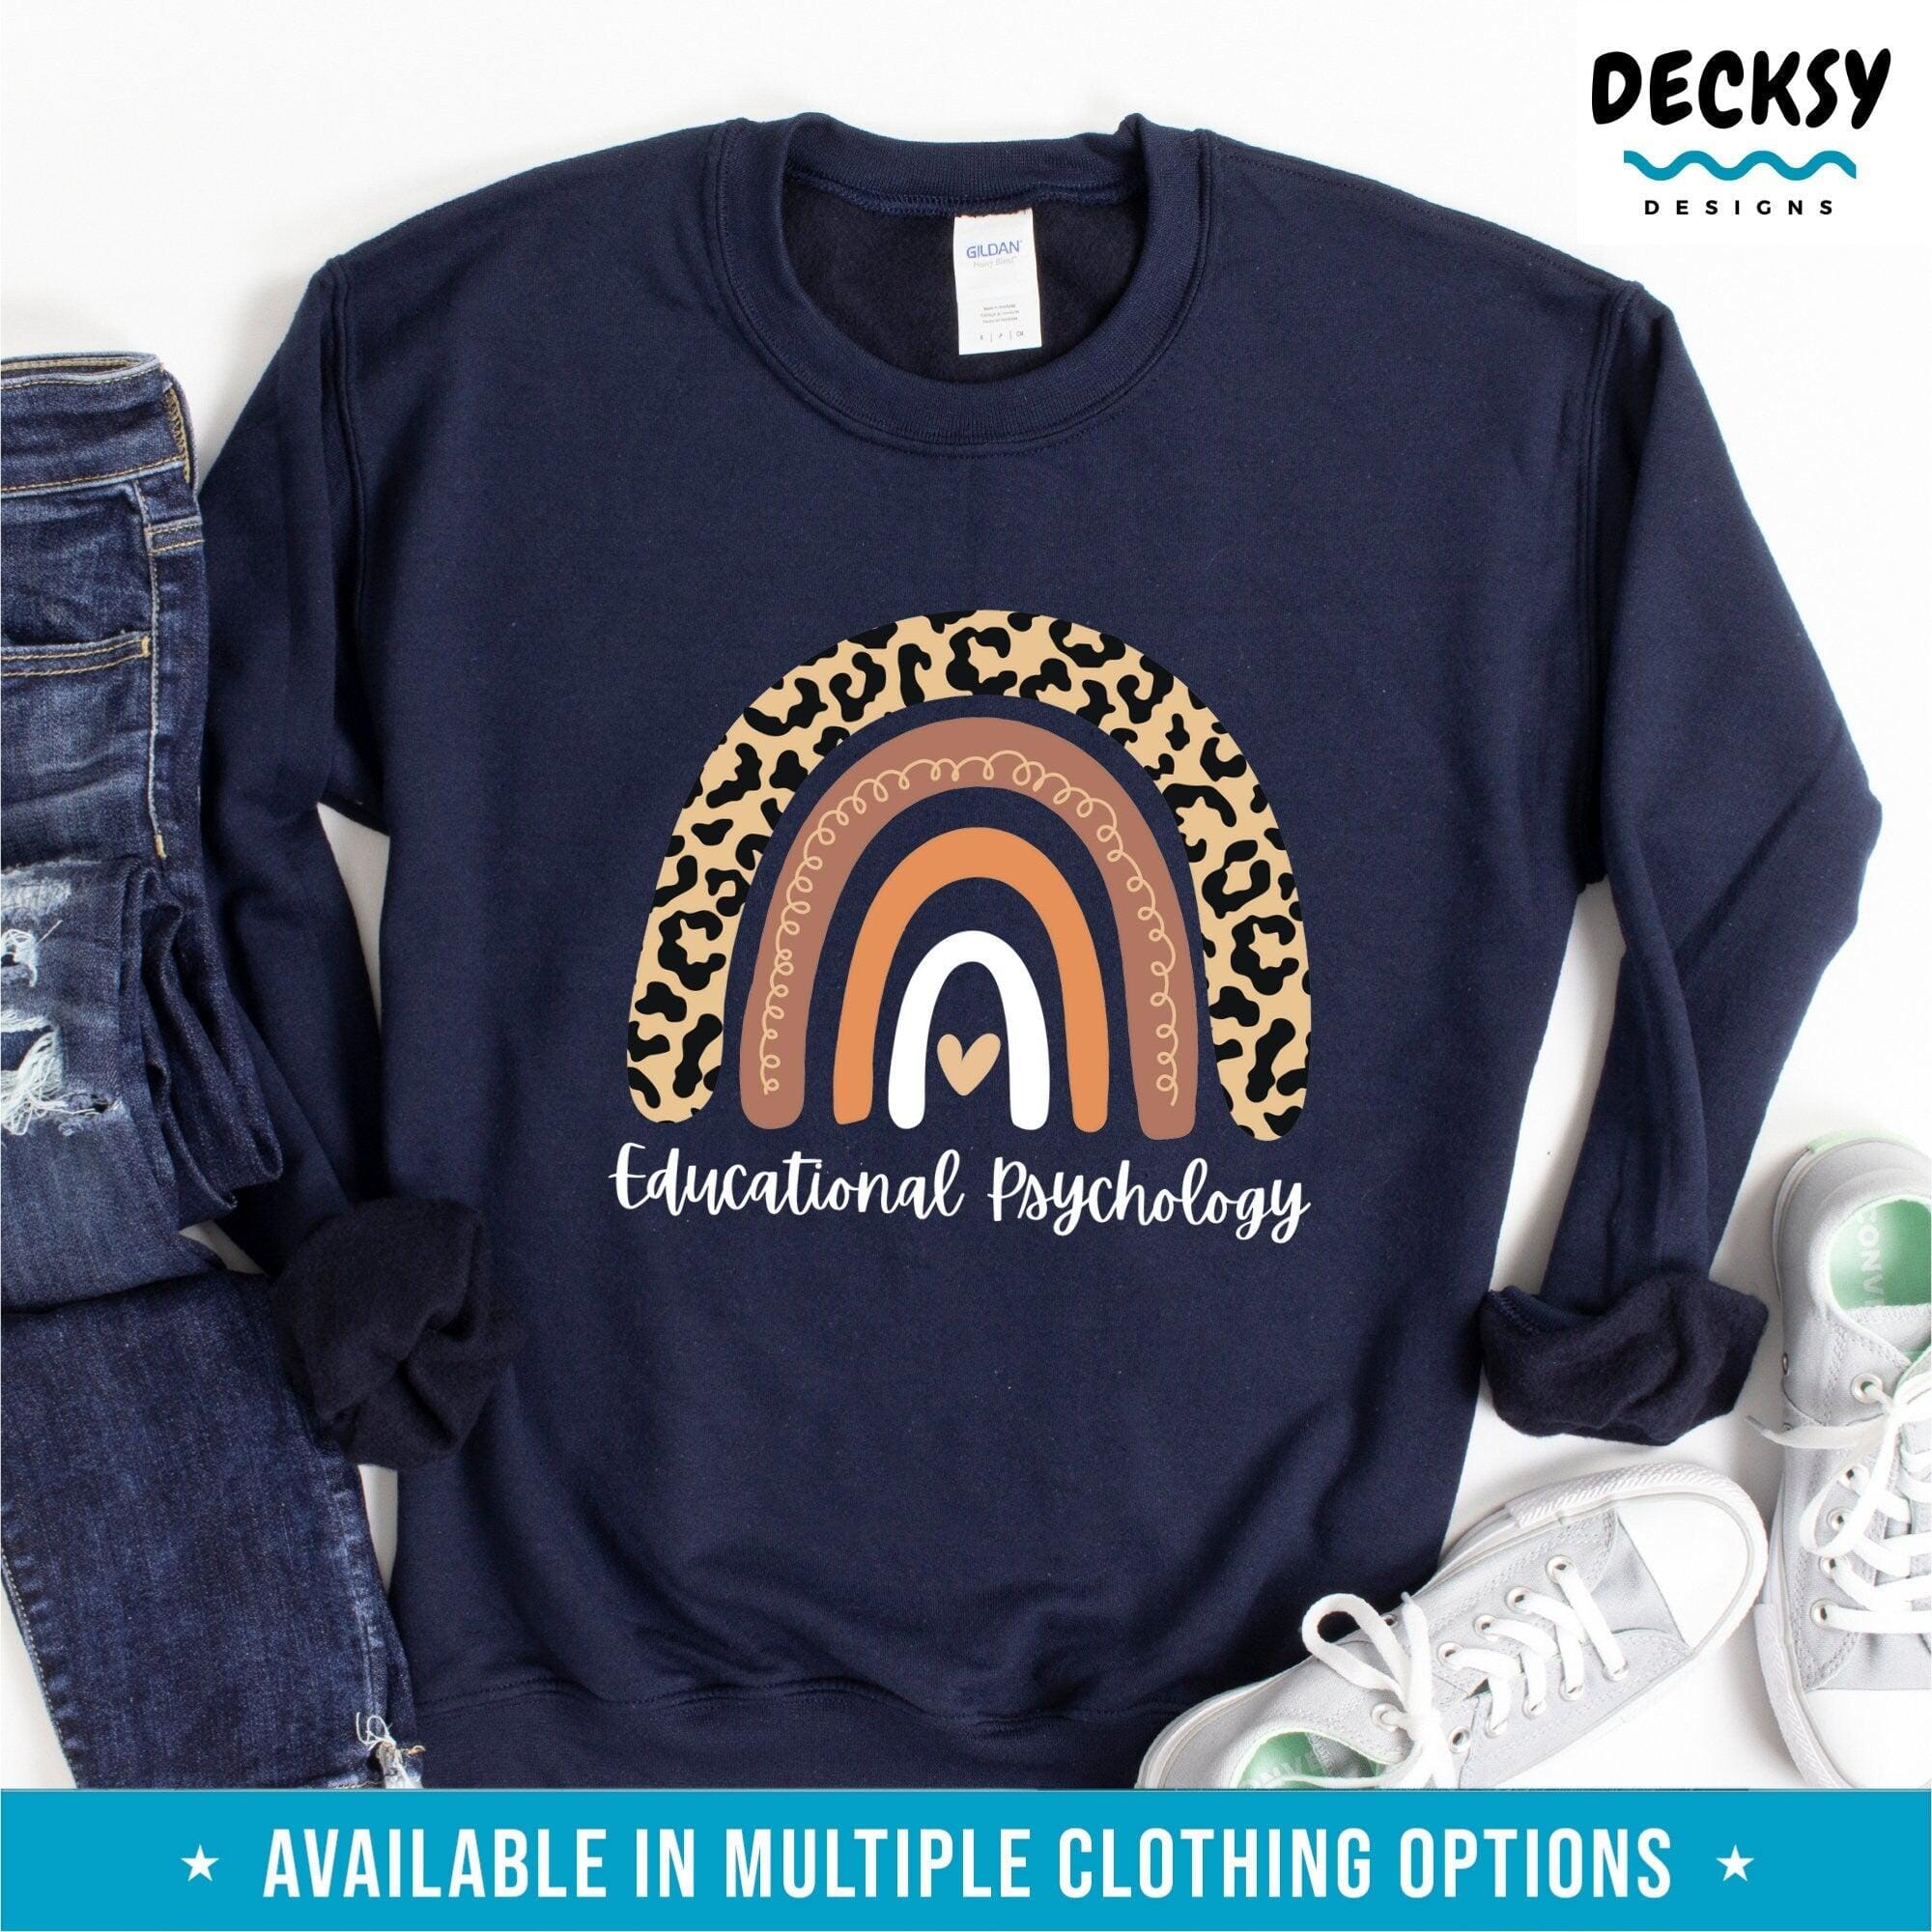 Educational Psychology Shirt, School Psychologist Gift-Clothing:Gender-Neutral Adult Clothing:Tops & Tees:T-shirts:Graphic Tees-DecksyDesigns